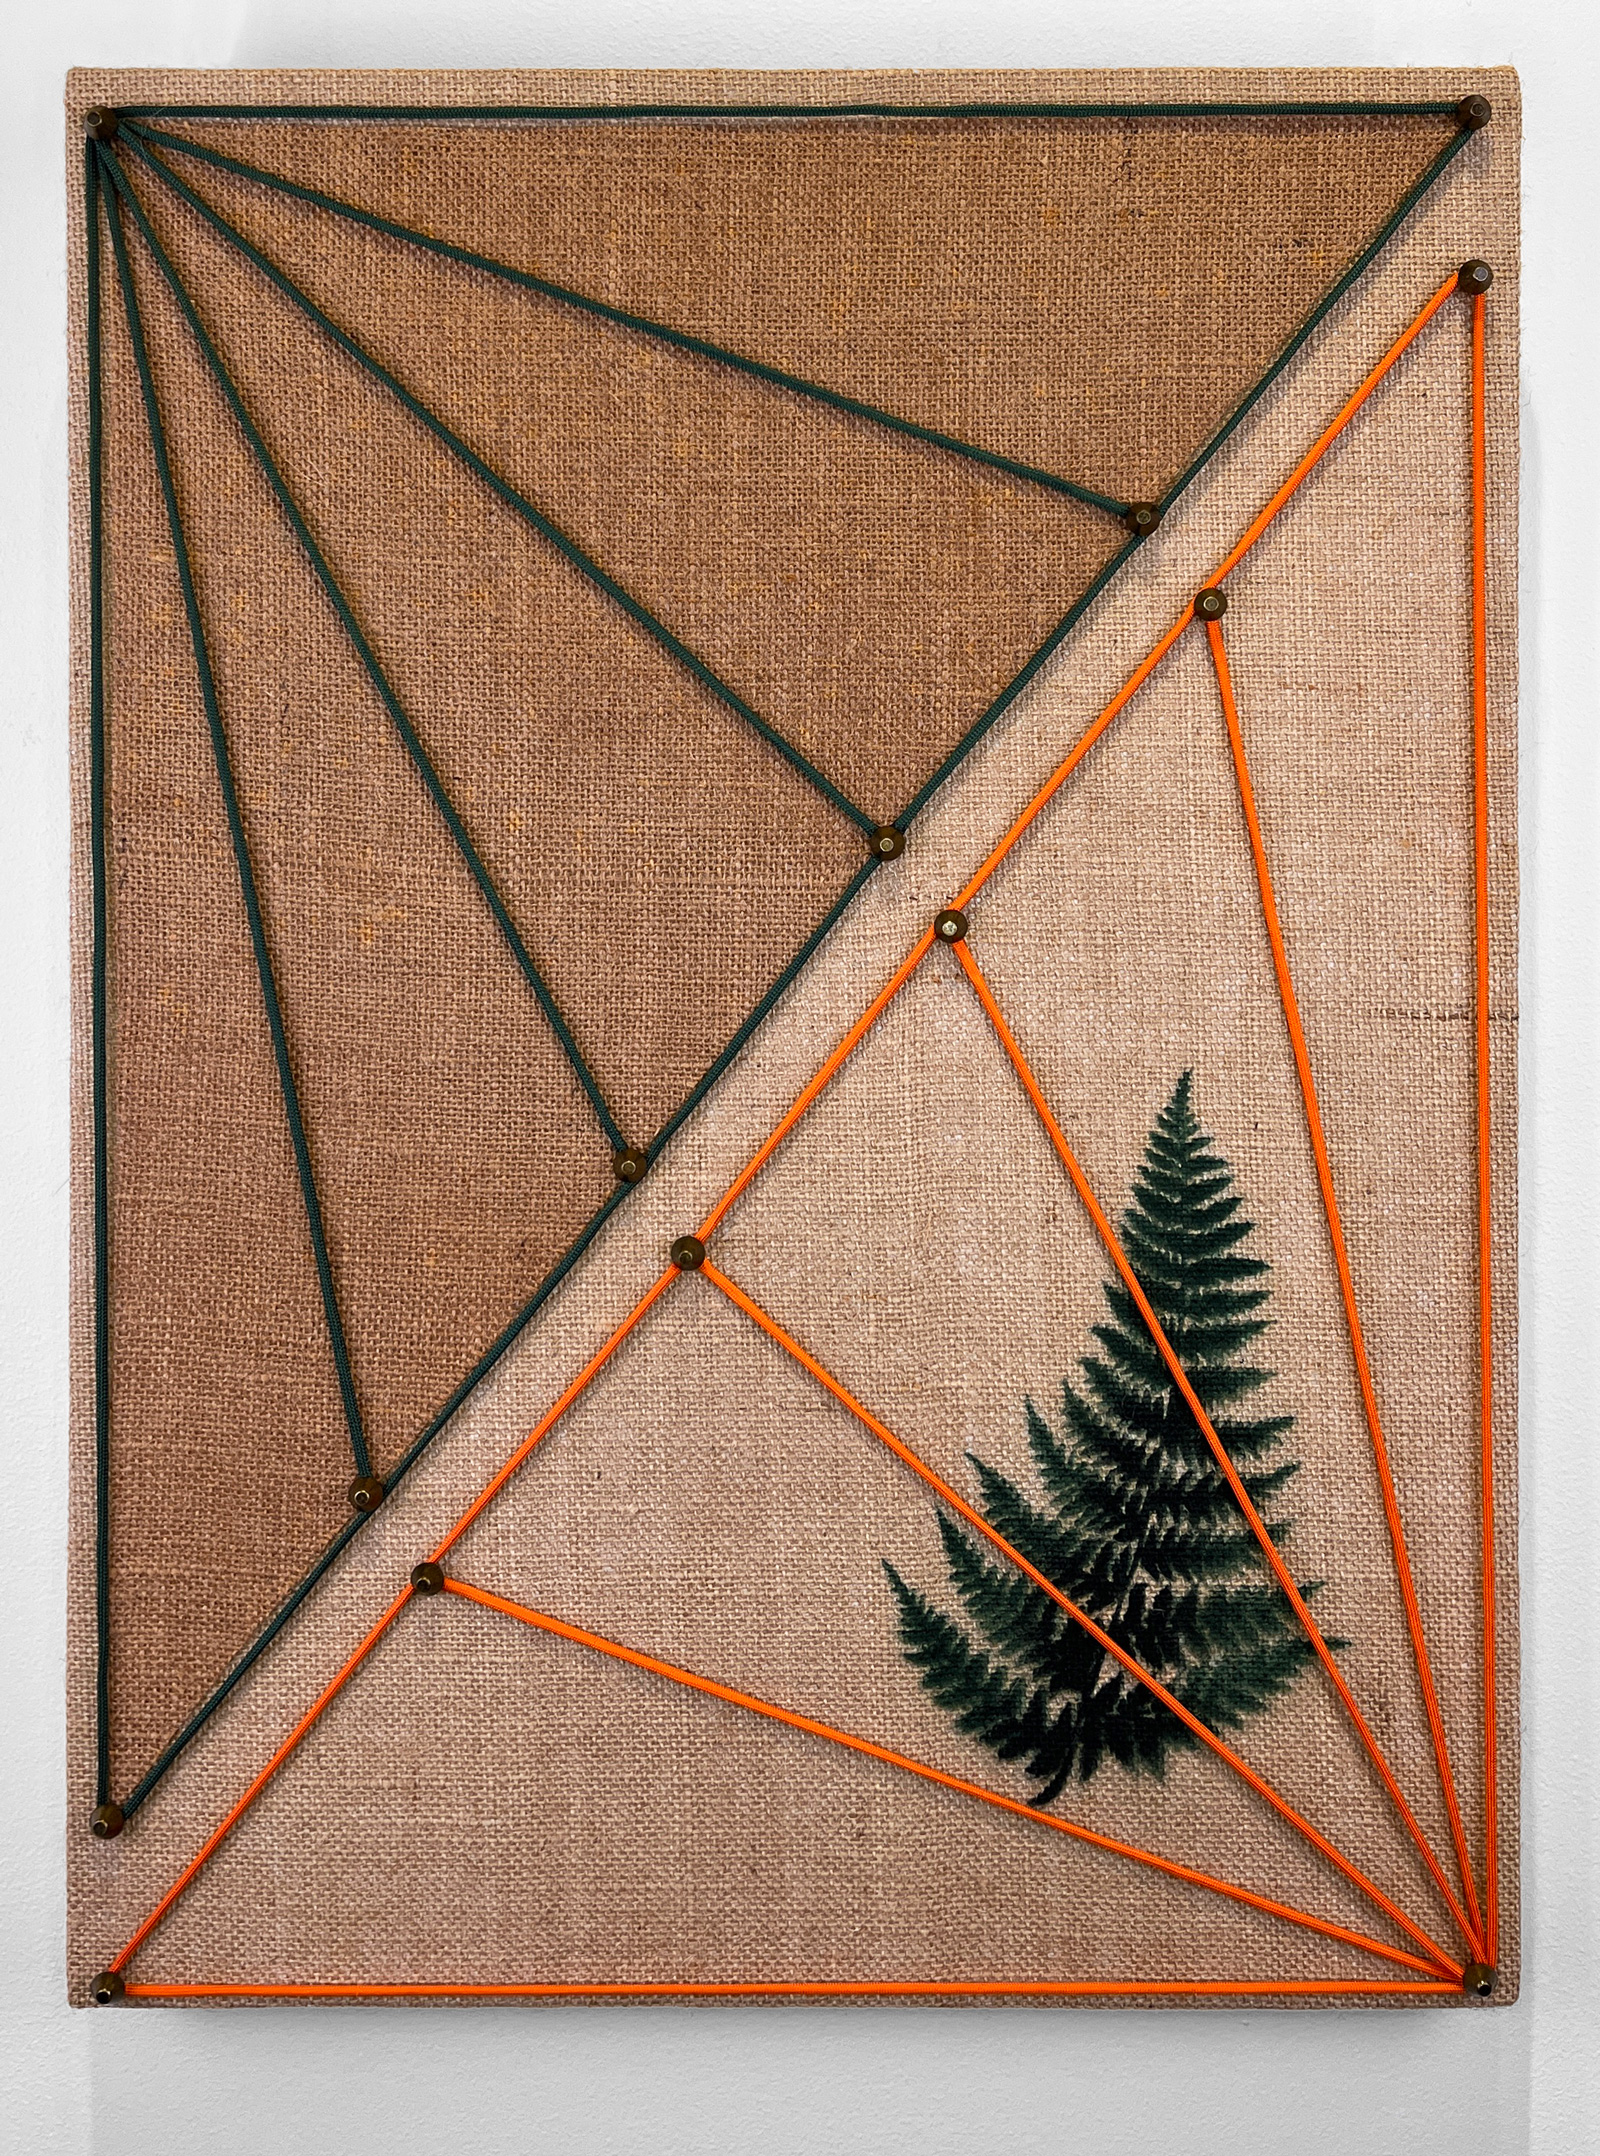 "Forest Cadency," 2022, spray paint, wood stain, paracord, notions, burlap on panel, 24in. x 18in.